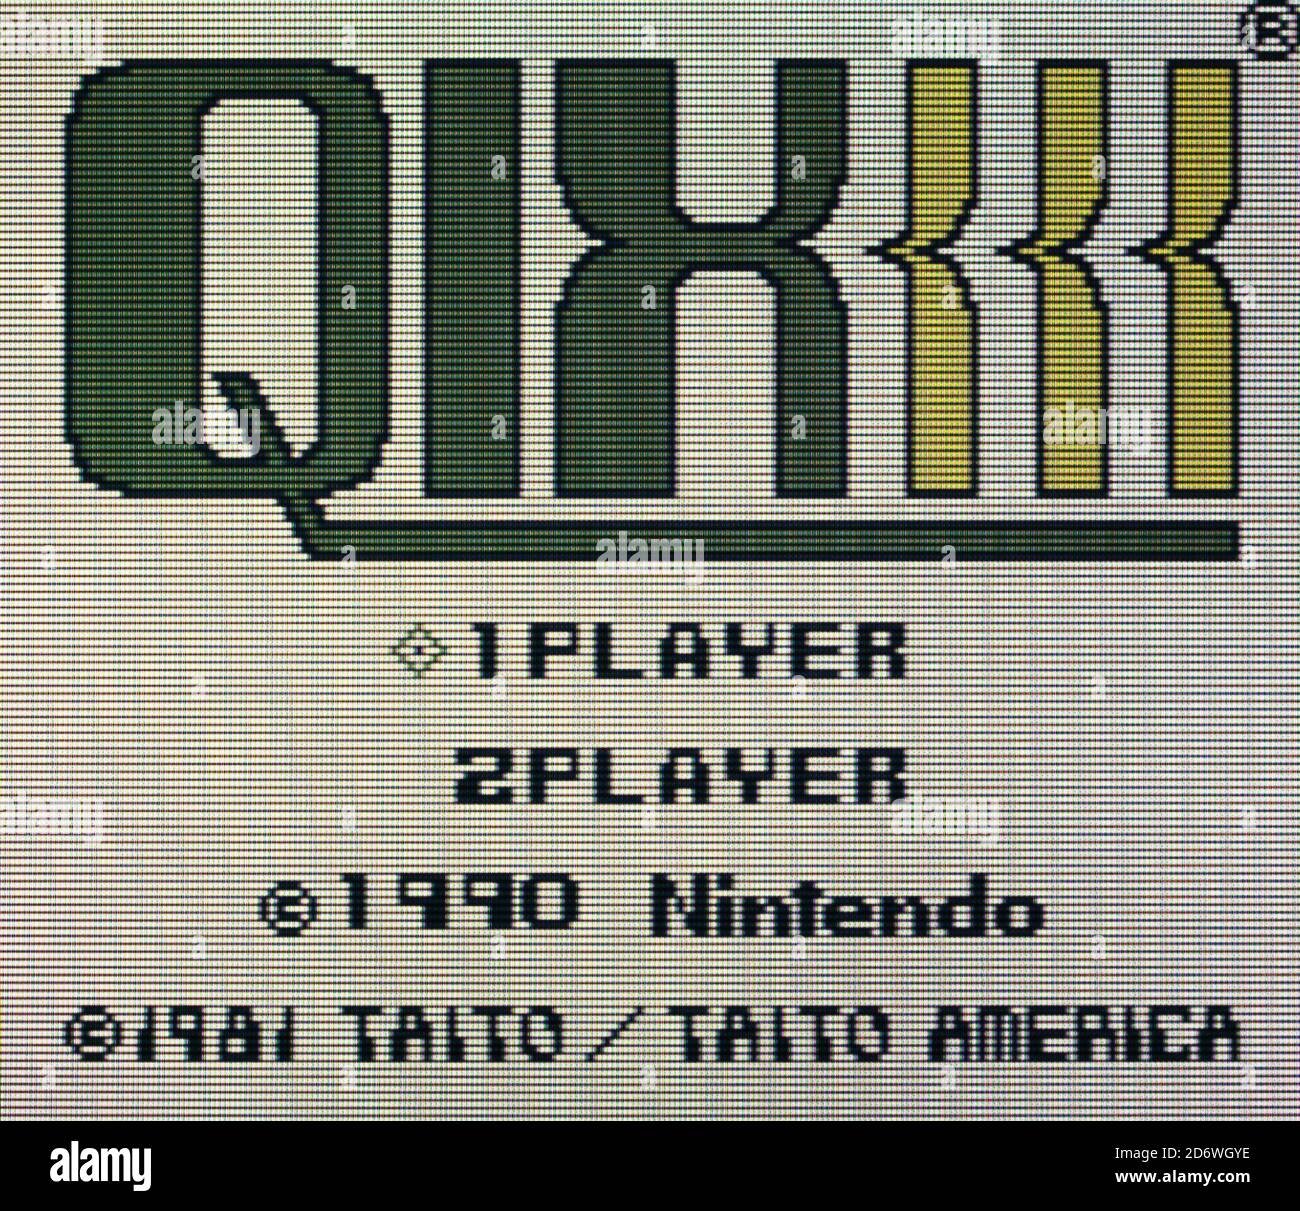 Qix - Nintendo Gameboy Videogame - Editorial use only Stock Photo